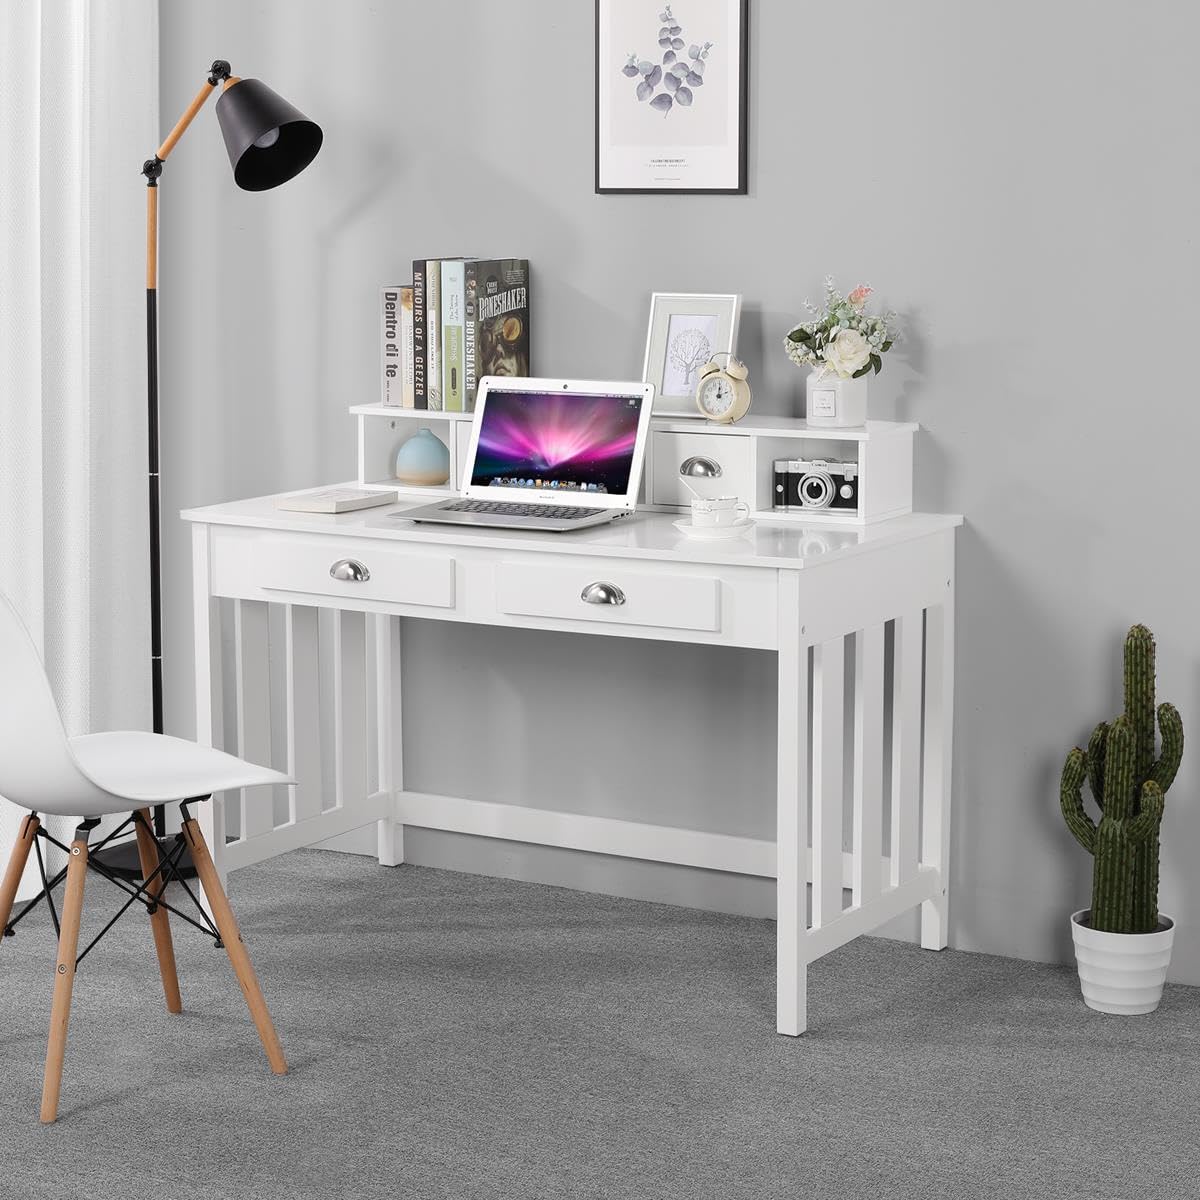 Yaheetech 47 in Large Writing Computer Desk with Drawers Home Office Desk, Wood Frame Secretary Desk for Home Office with Large Desktop, Modern Workstation with Removable Floating Organizer, White